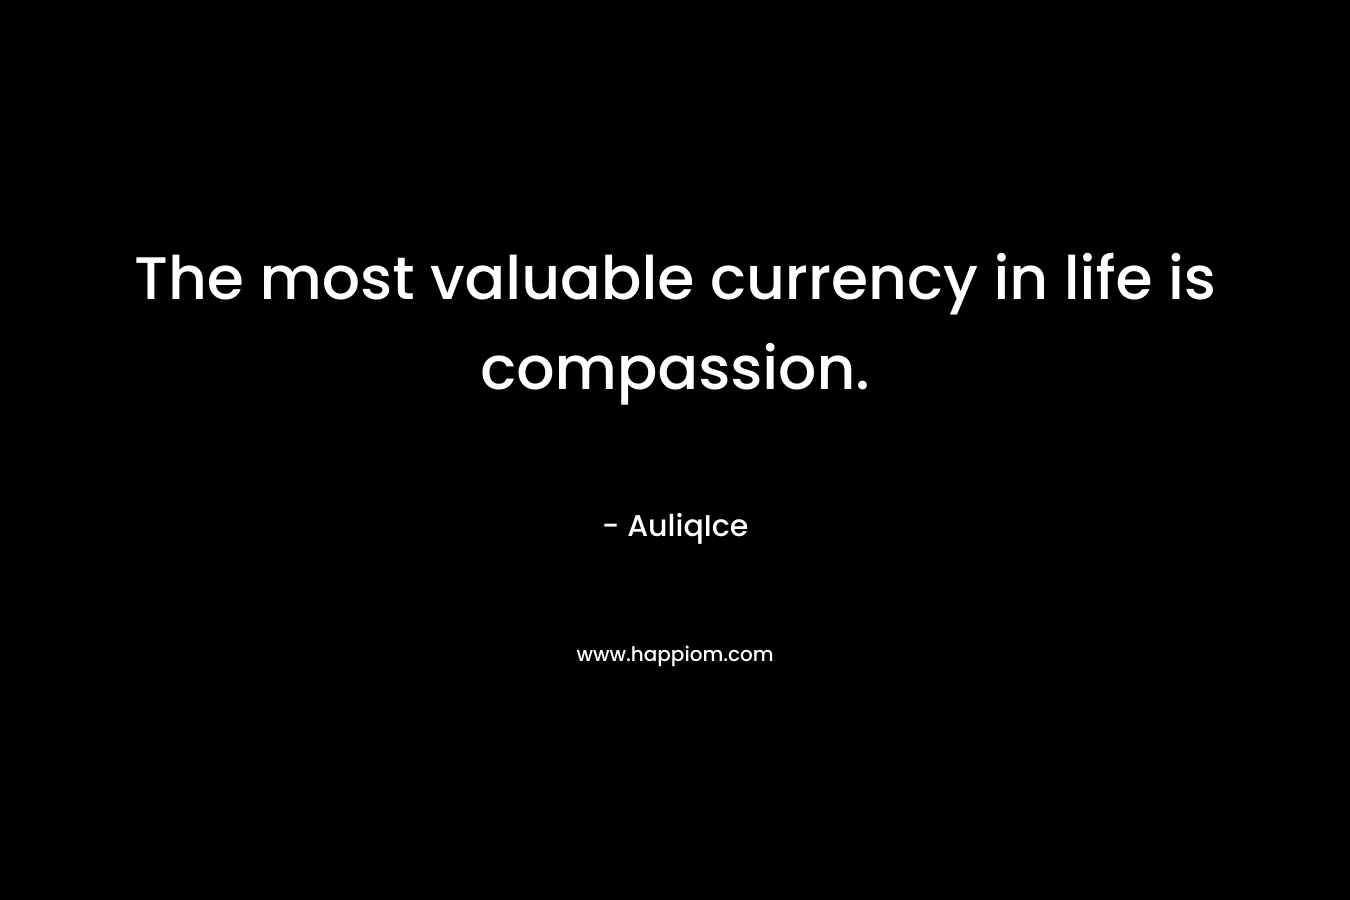 The most valuable currency in life is compassion.